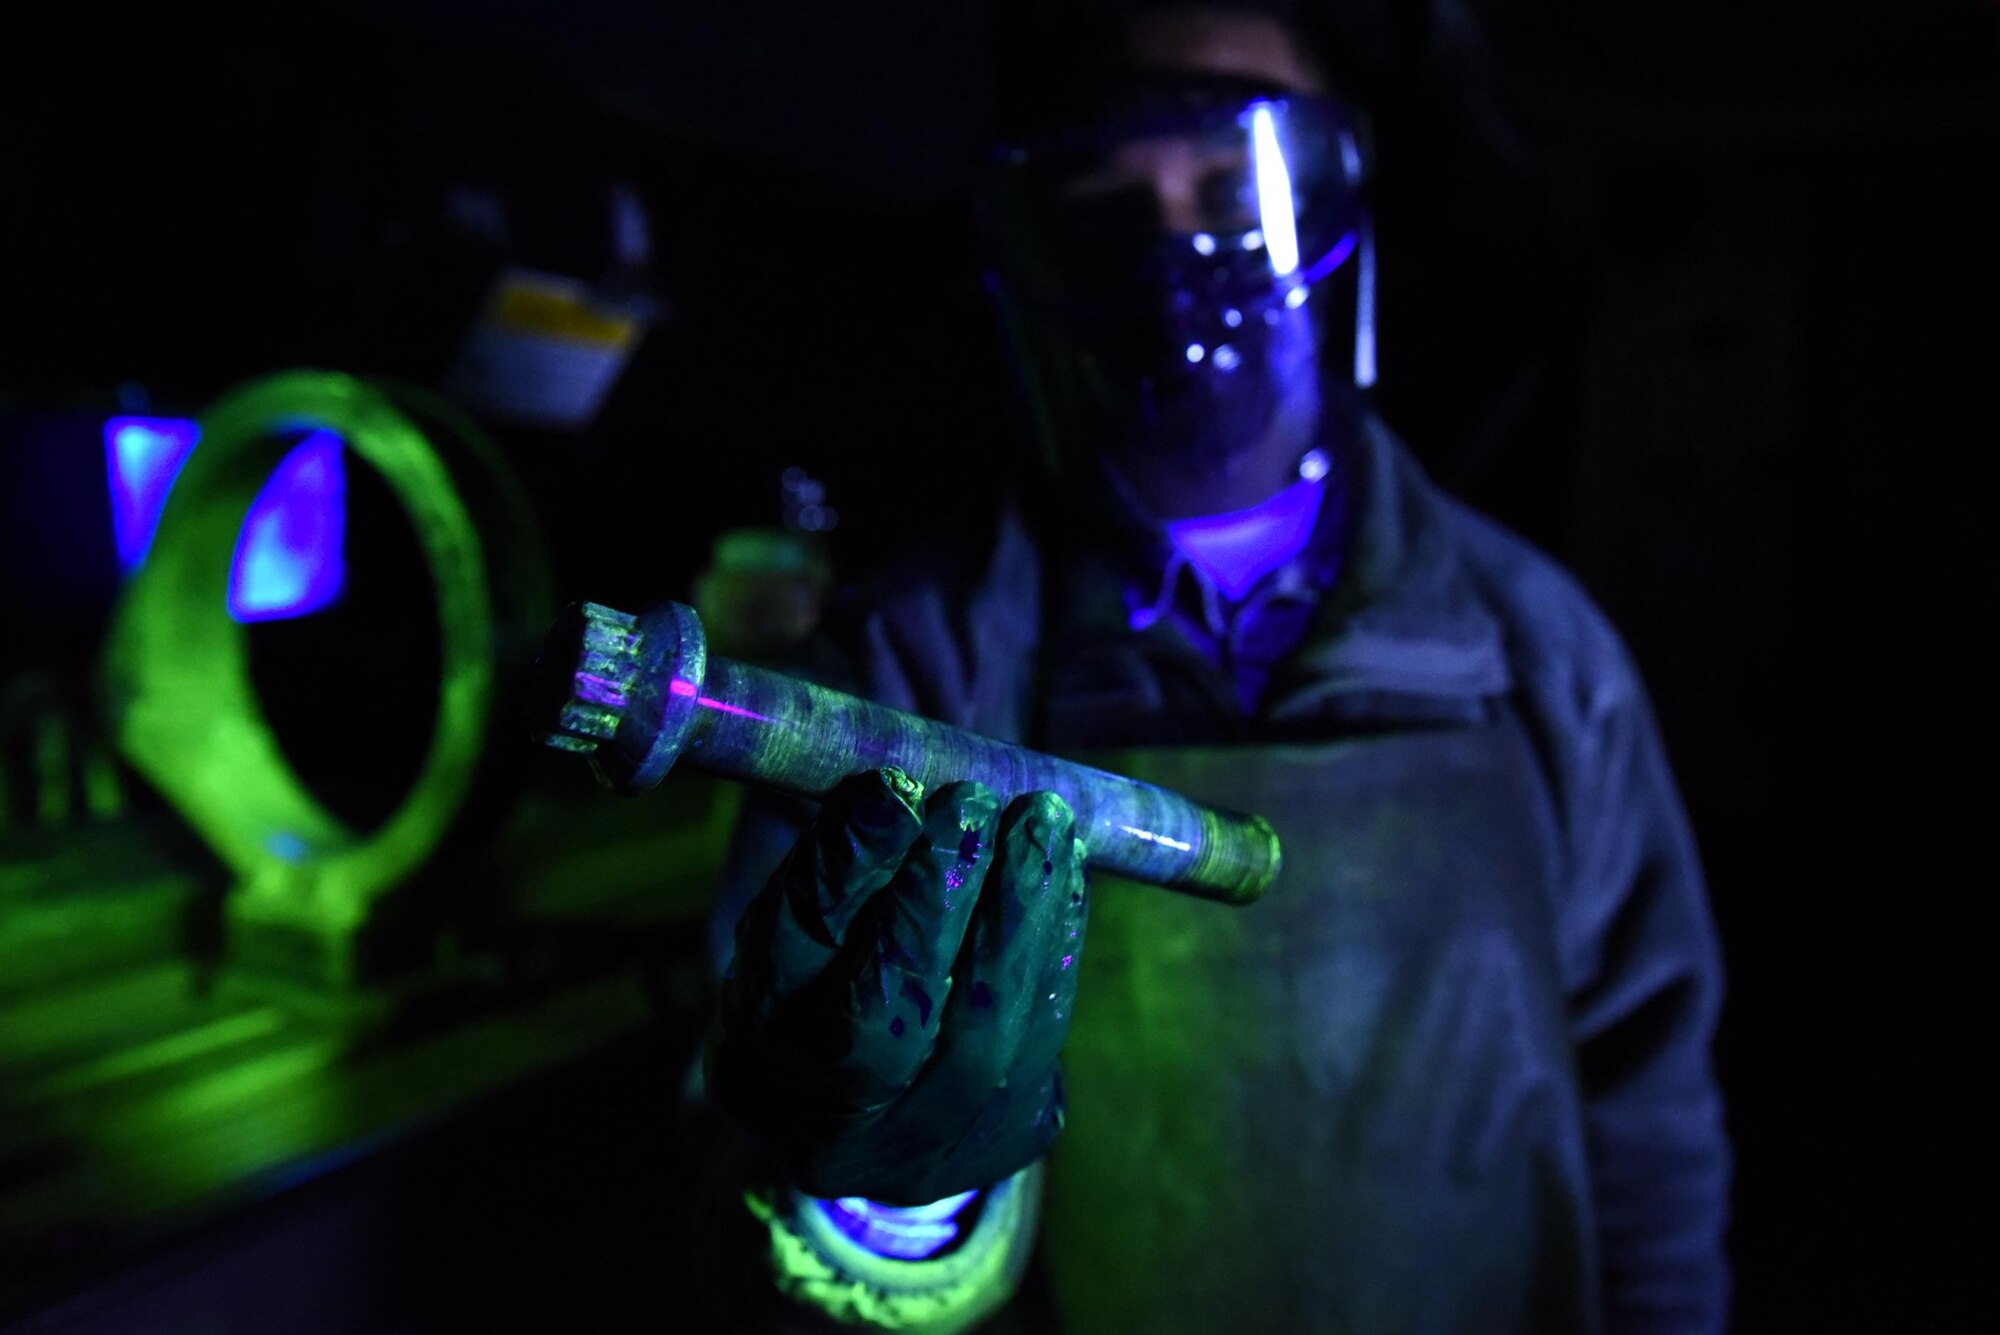 U.S. Air Force Airman 1st Class Brandon Davis, 19th Maintenance Squadron nondestructive inspections journeyman, holds an inspected main landing wheel bolt at Little Rock Air Force Base, Ark. NDI Airmen find small cracks in aircraft parts by running them through multiple chemical baths and using black lights to illuminate the defects. (U.S. Air Force photo by Airman 1st Class Kevin Sommer Giron)